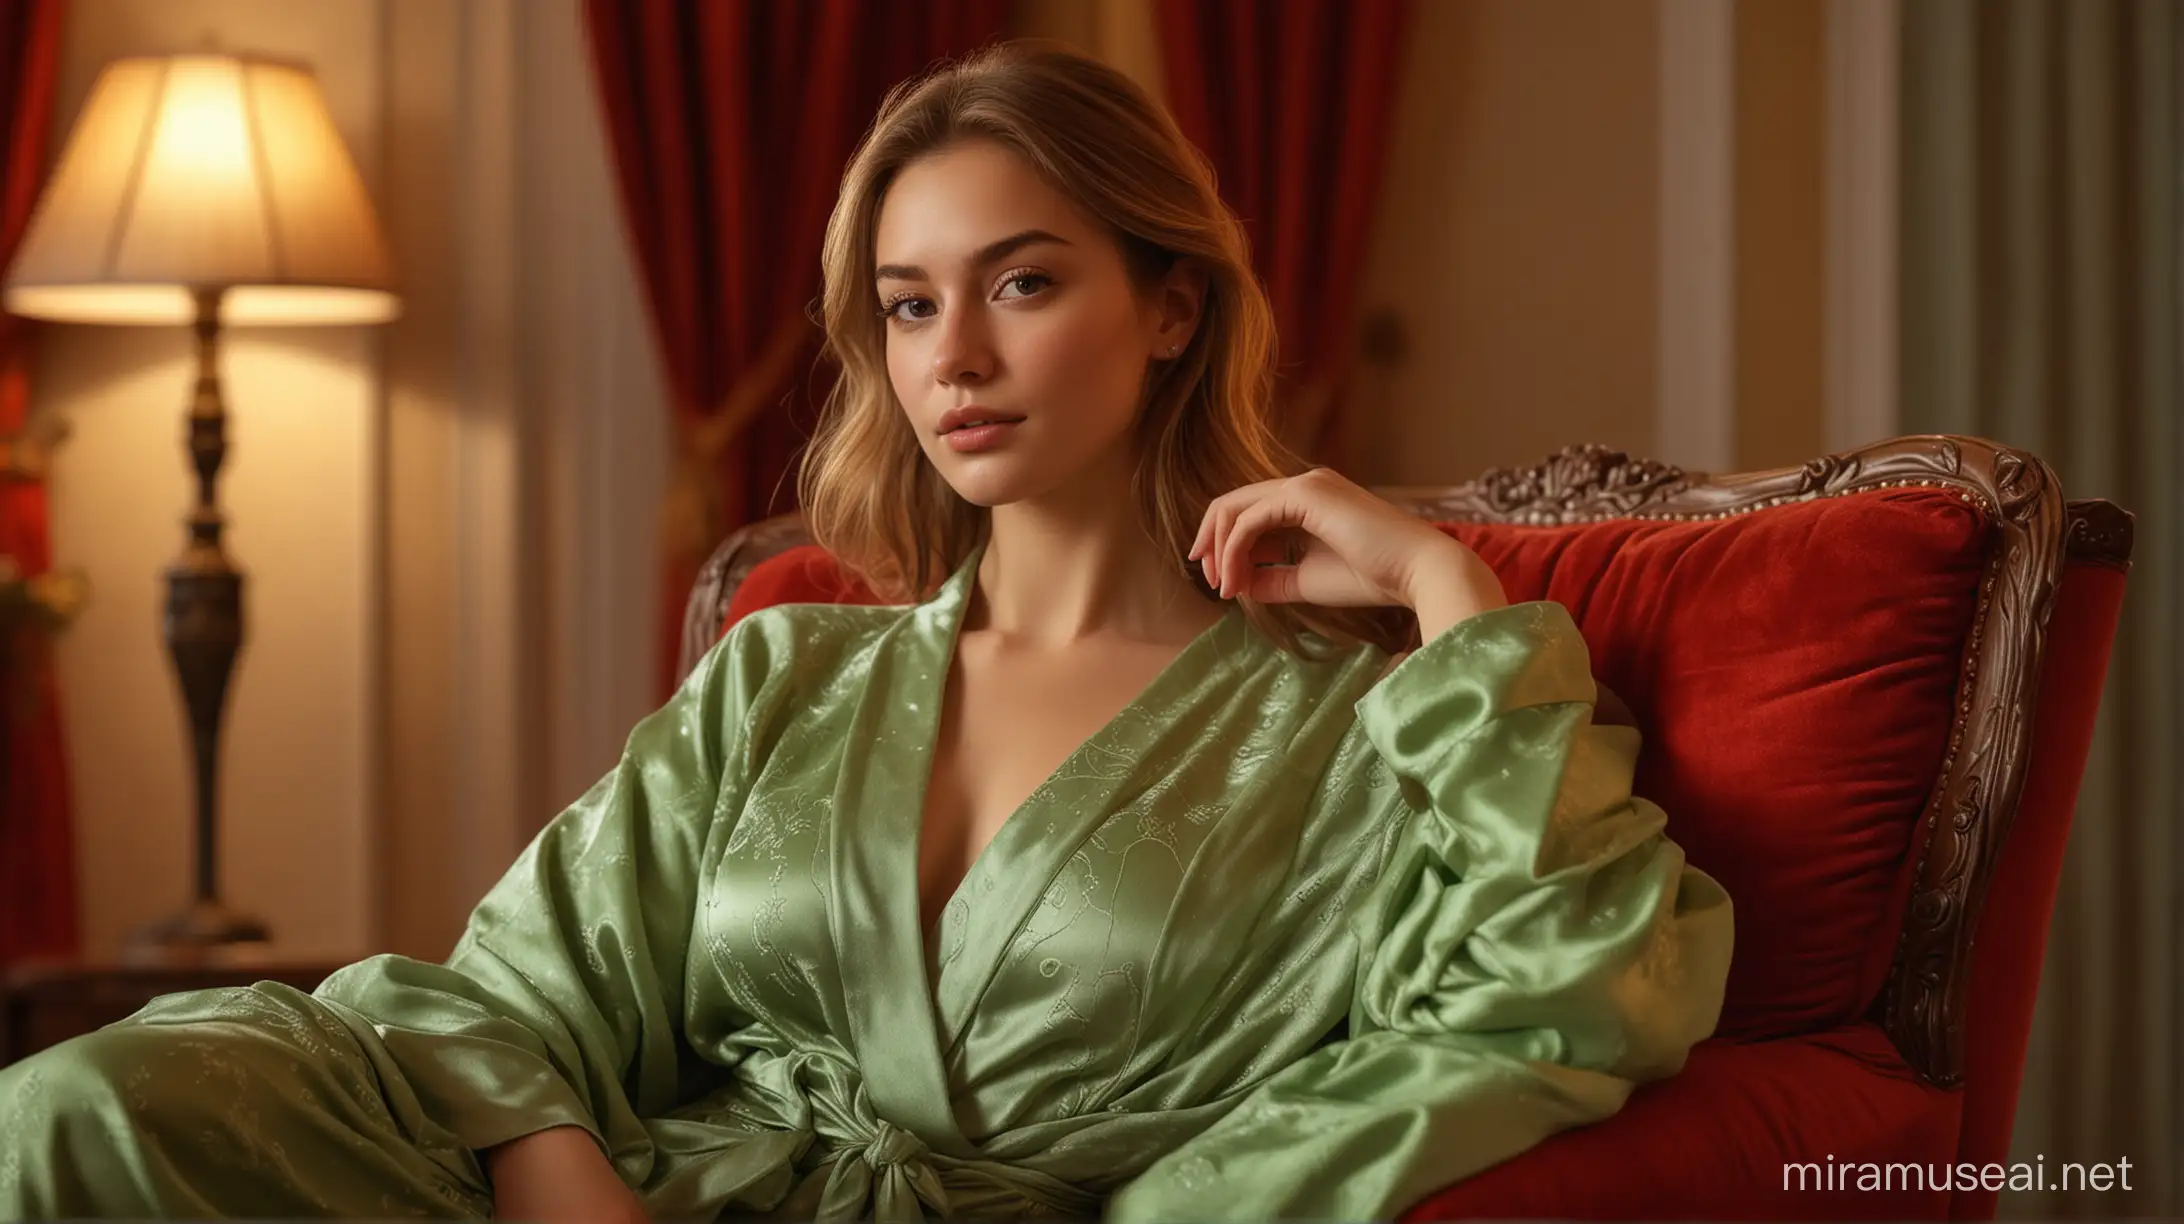 photo realistic, high quality, young woman, perfect face, light-brown hair, wearing light-green robe, sitting on the armchair, red light night room, detailed brushwork, soft bokeh, depth of field, opulent colors, velvety shadows, meticulous detail, luxurious atmosphere, sumptuous textures